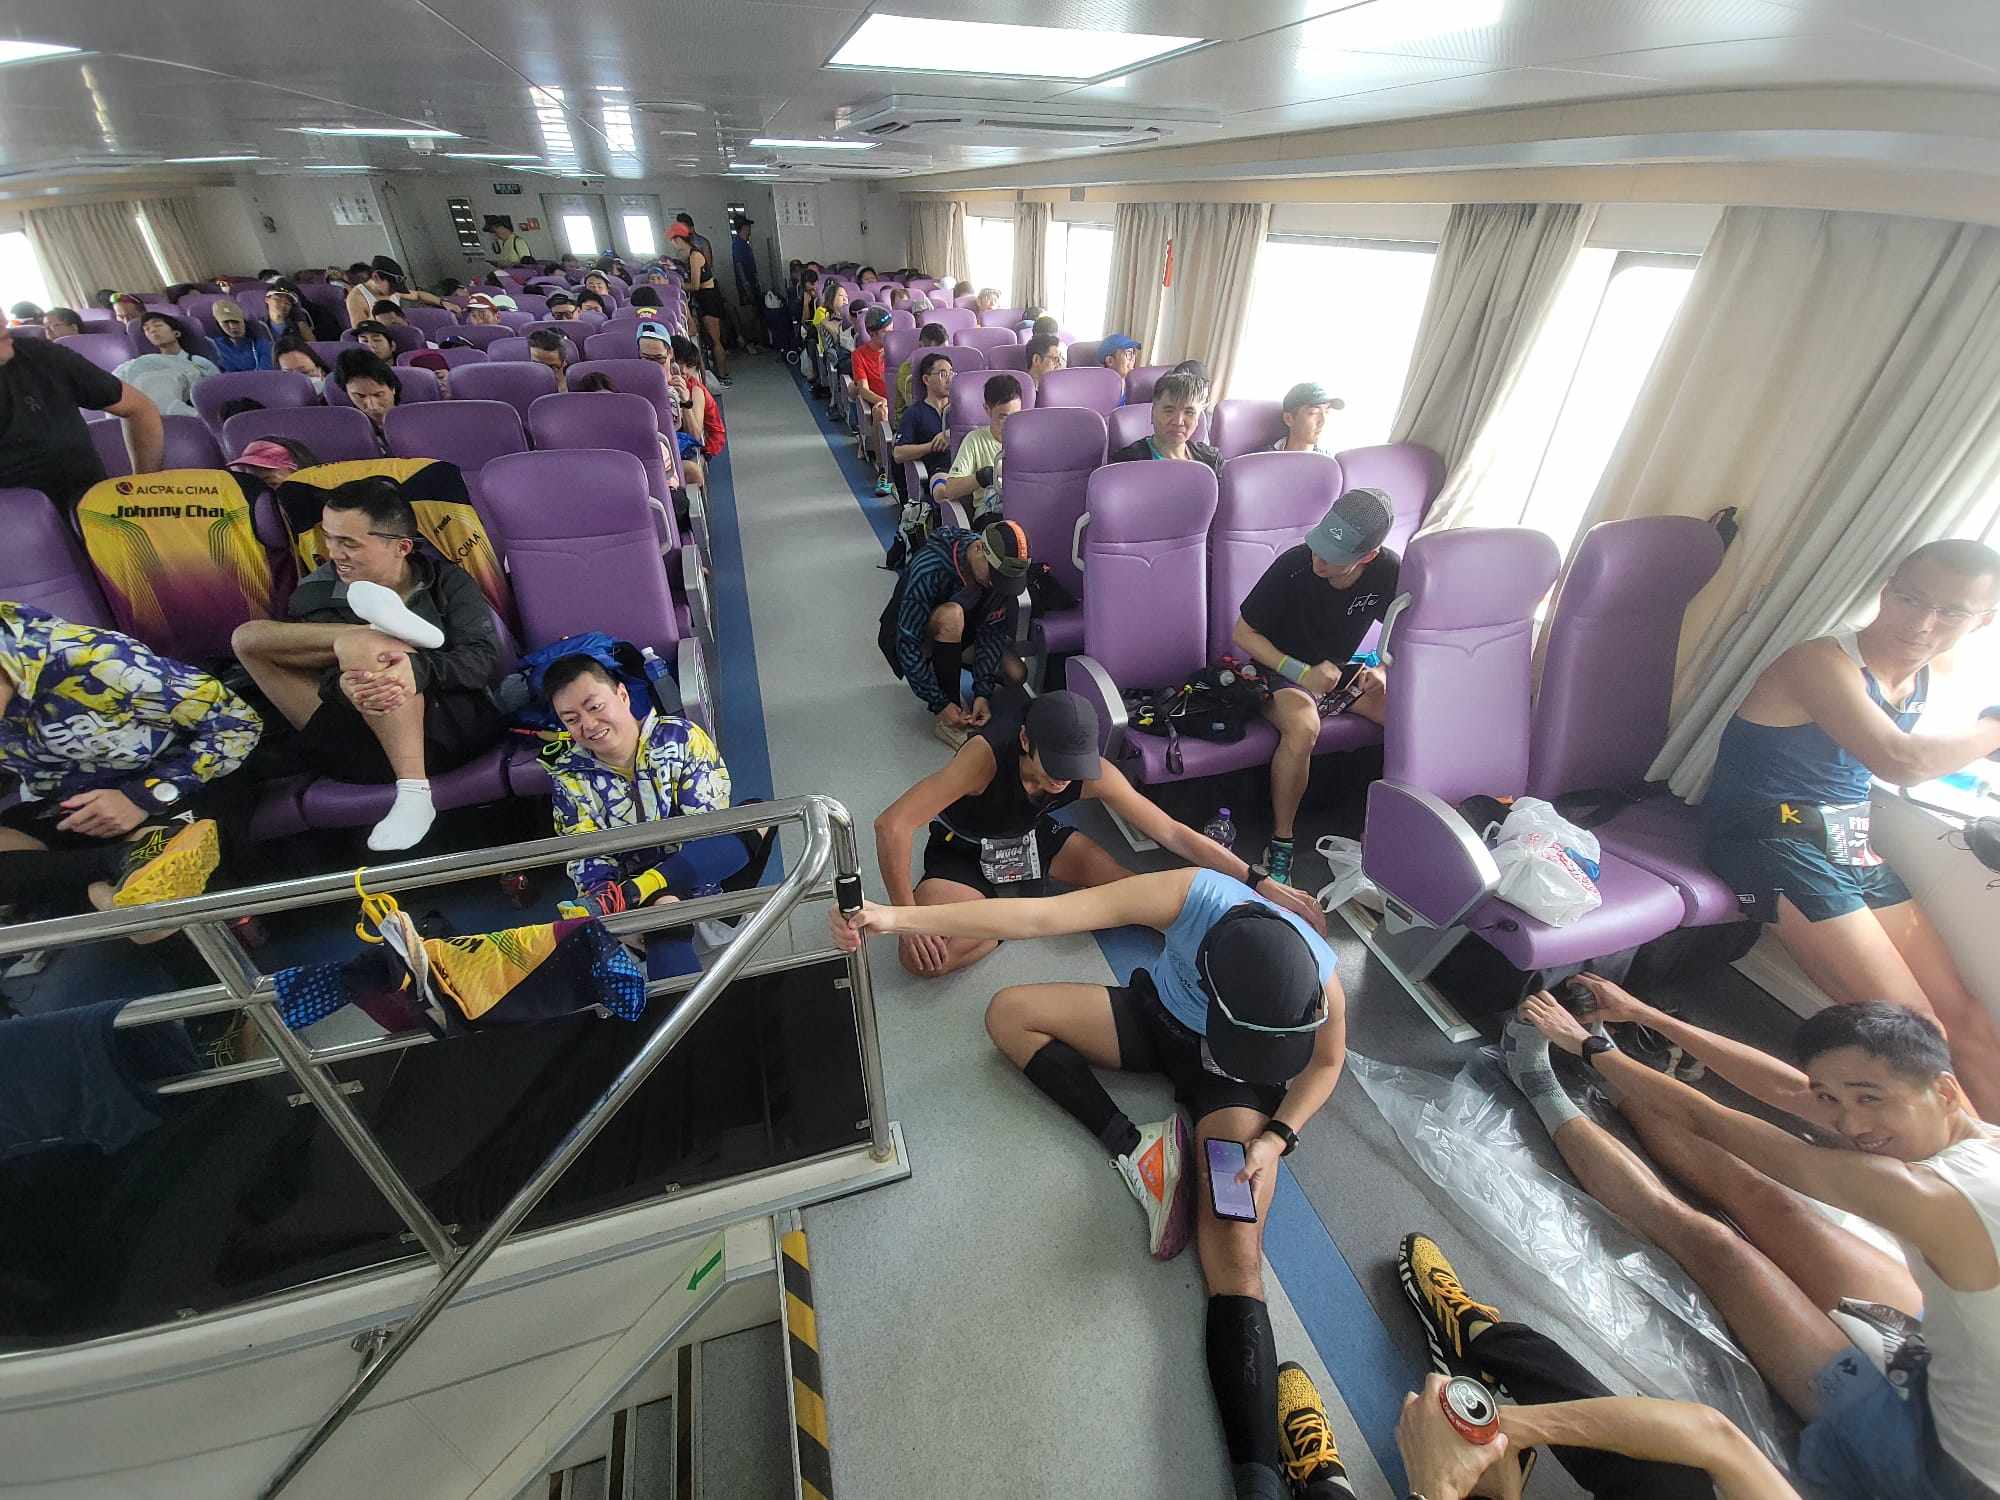 Runners of the 4 Trail Ultra Loop pack on to the ferry from Tuen Mun to Lantau Island. Photo: No Race No Goal